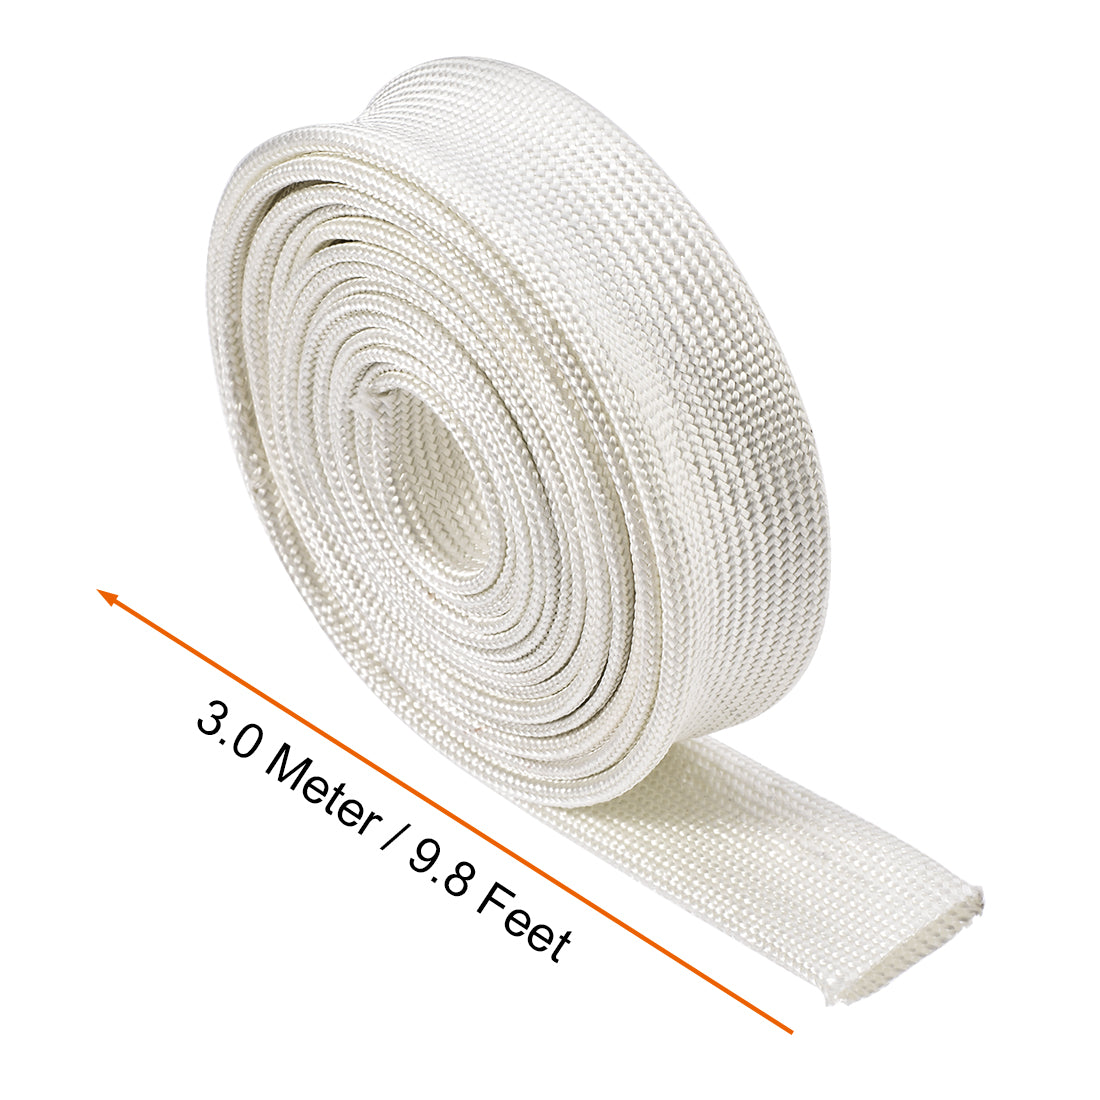 uxcell Uxcell Insulation Cable Protector, 9.8Ft-16mm High TEMP Fiberglass Sleeve White